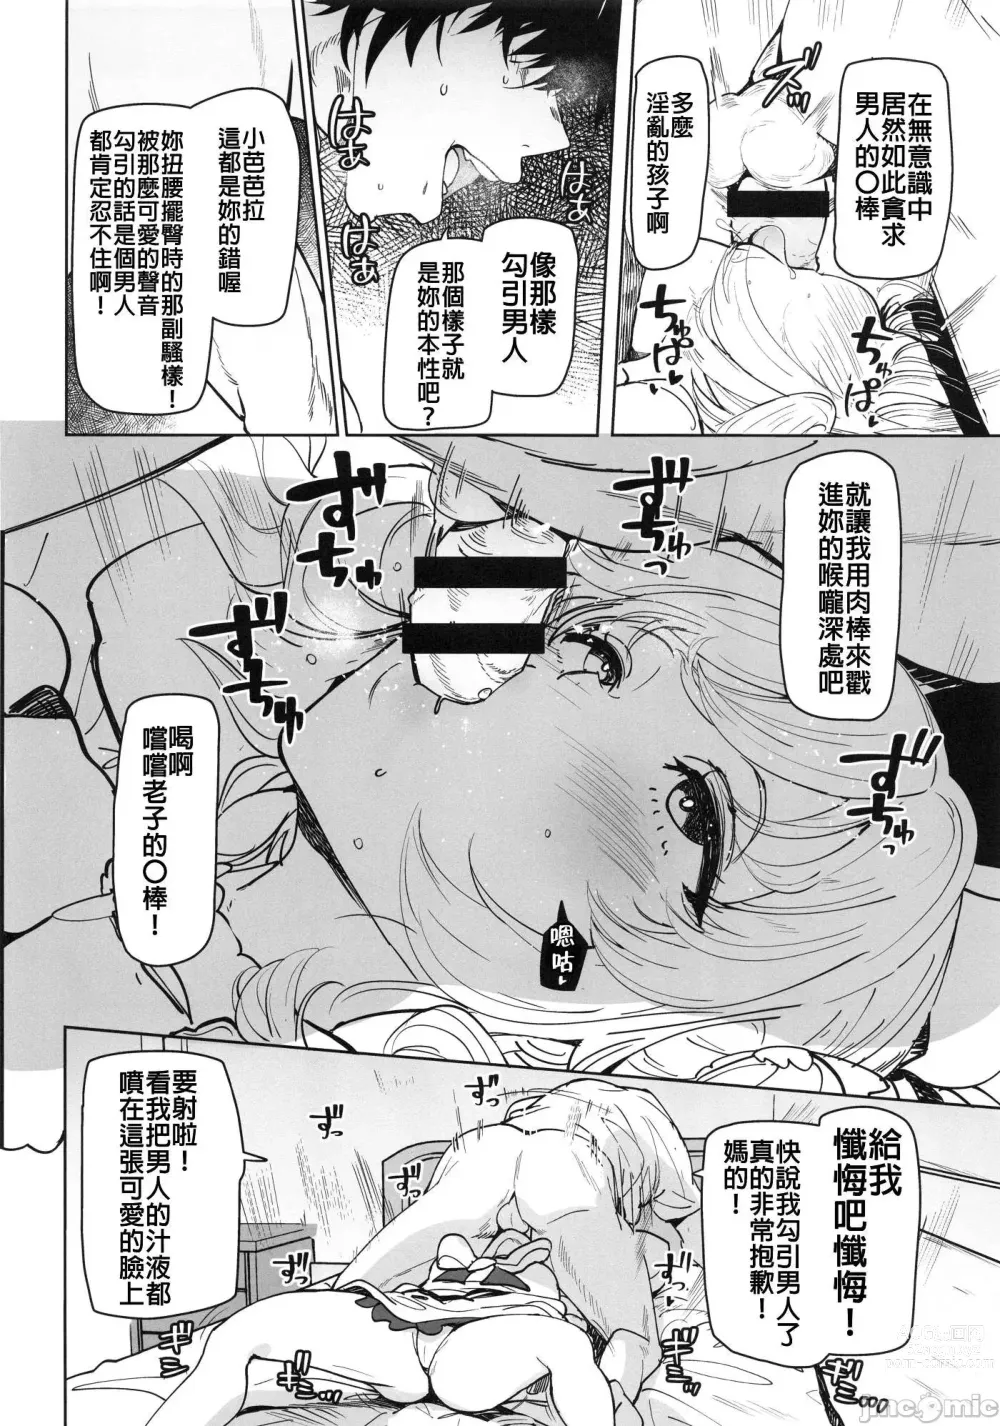 Page 7 of doujinshi 芭芭拉 入眠